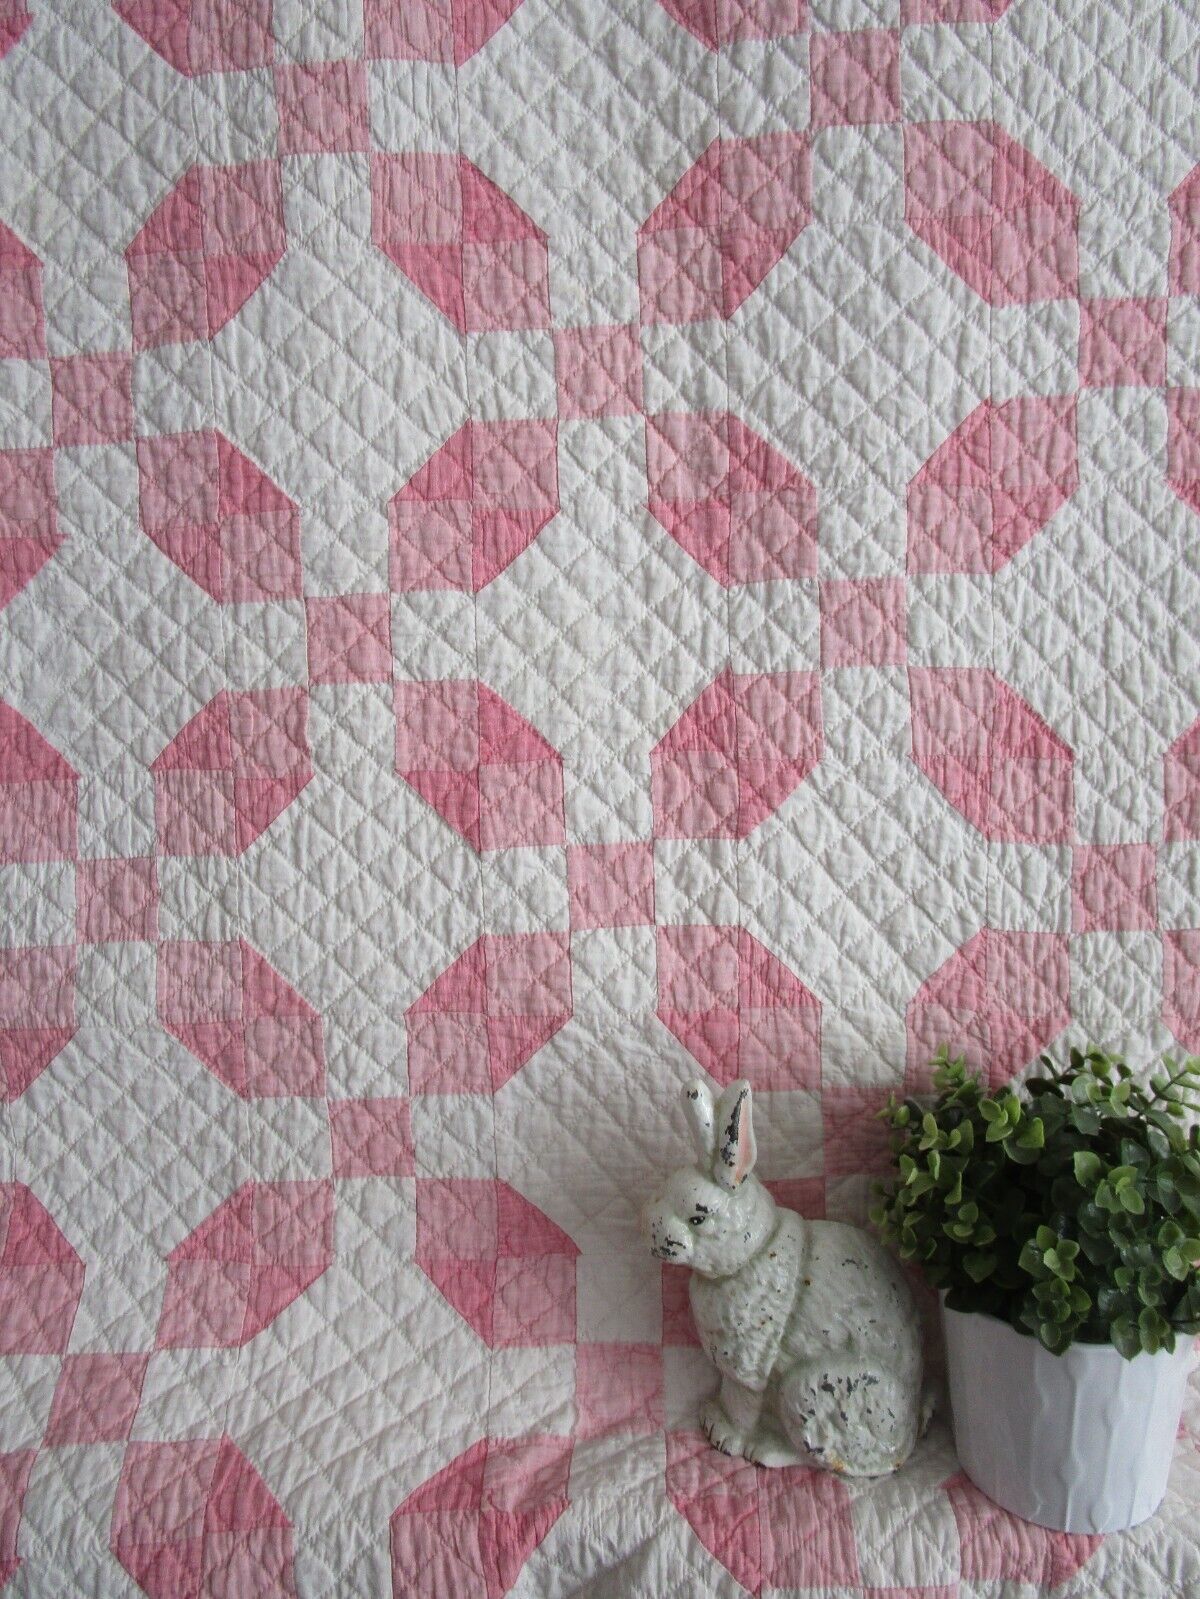 Vintage Hand Quilted Patchwork Quilt, PINK, ANTIQUE WHITE, 66 X 76, COTTON, NICE